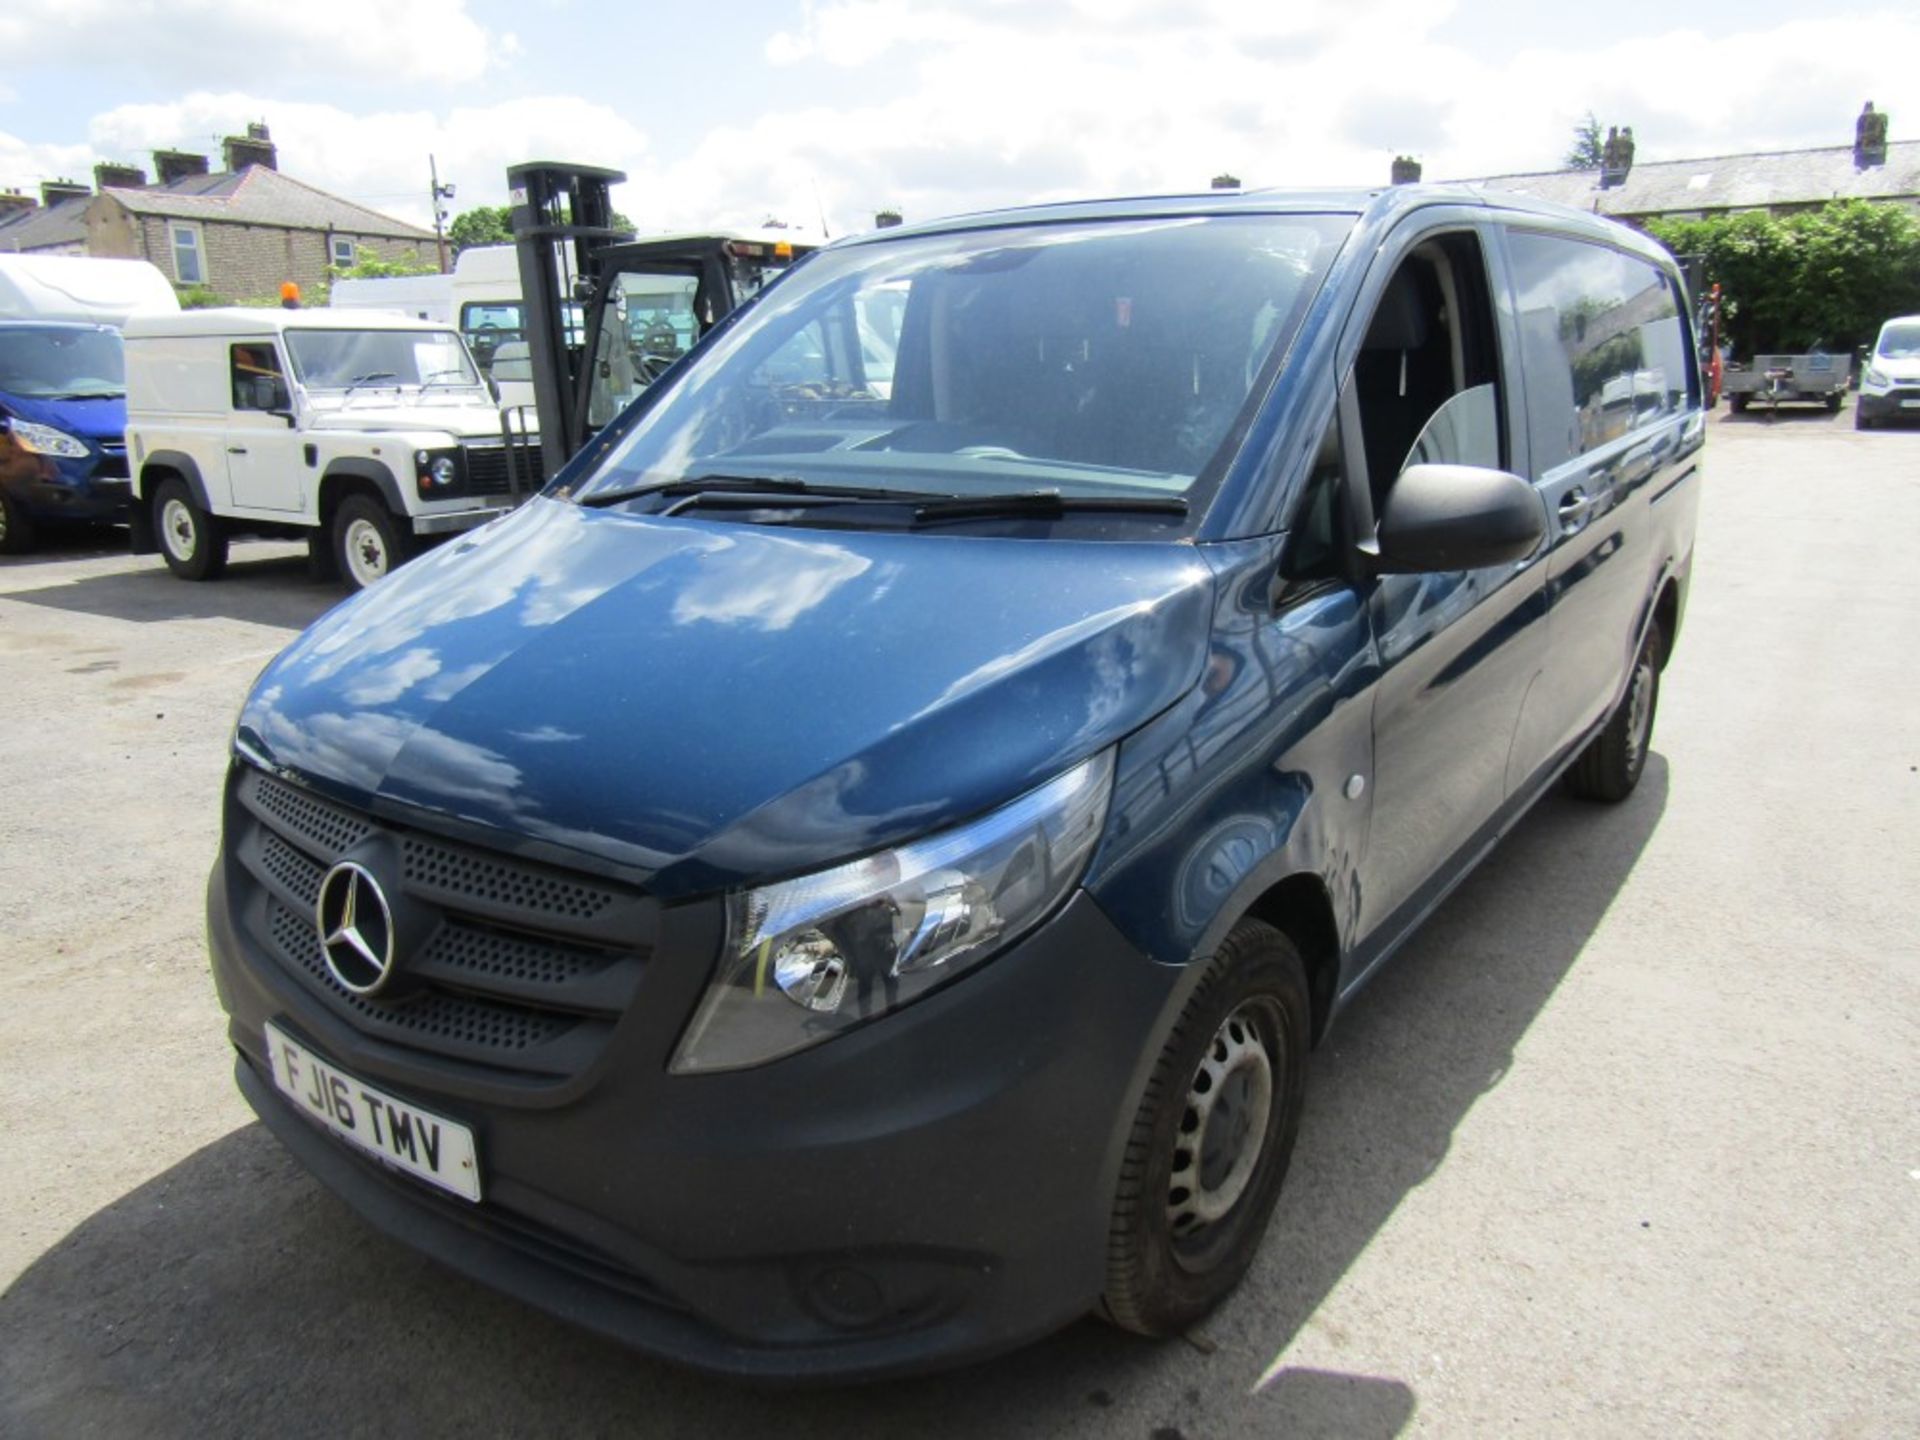 16 reg MERCEDES VITO 109 CDI, 1ST REG 03/16, TEST 03/23, 186268M, V5 HERE, 2 FORMER KEEPERS [NO - Image 2 of 7